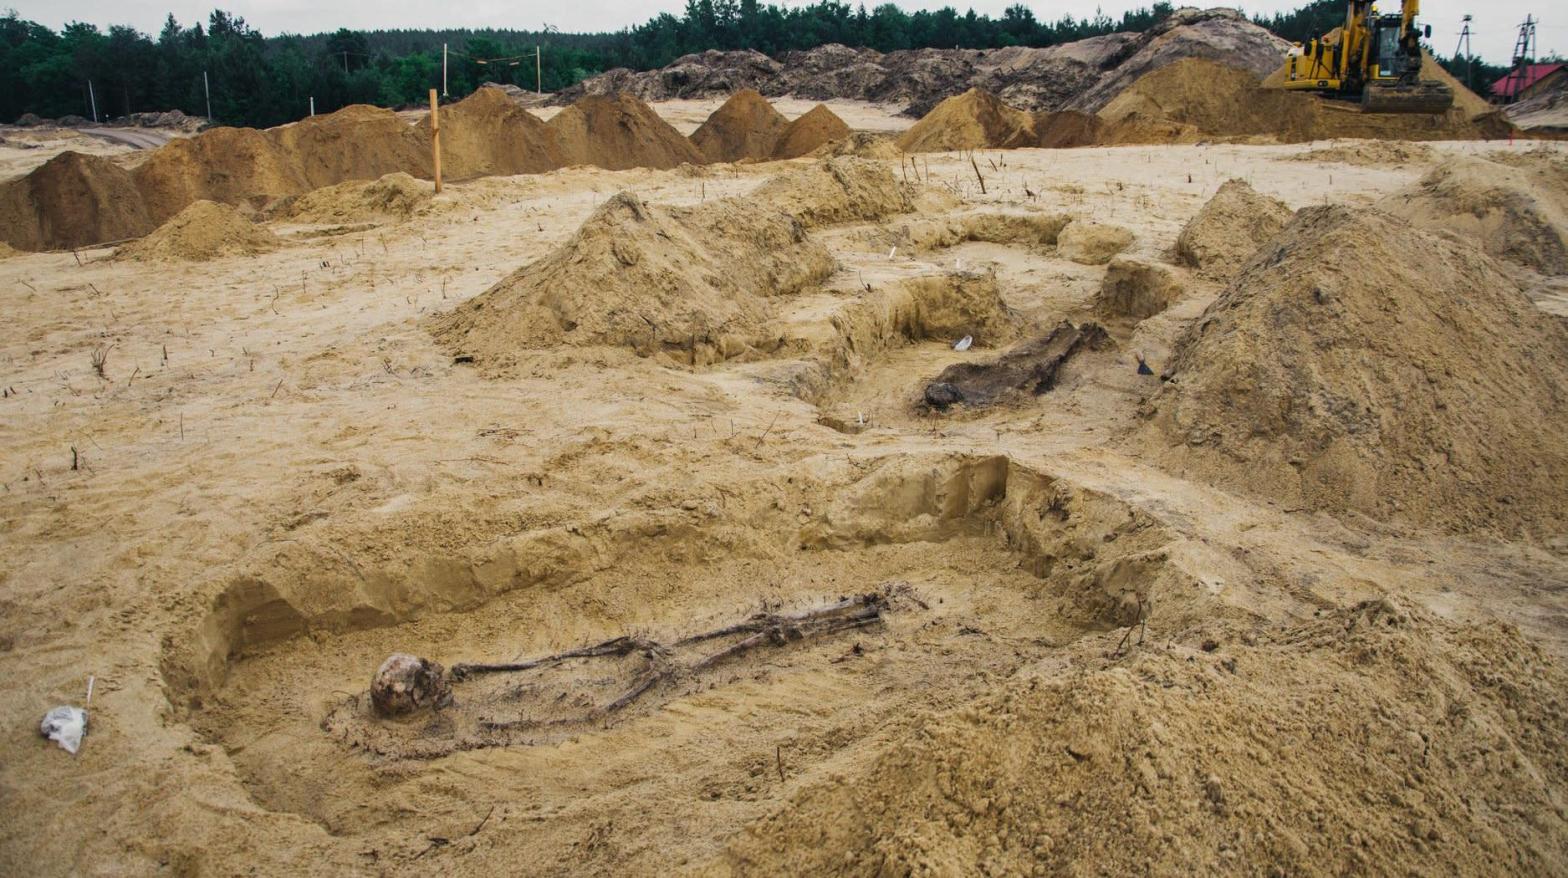 Some of the graves uncovered at the site in southeastern Poland.  (Image: Gminne Centrum Kultury w Jeżowem/Facebook)